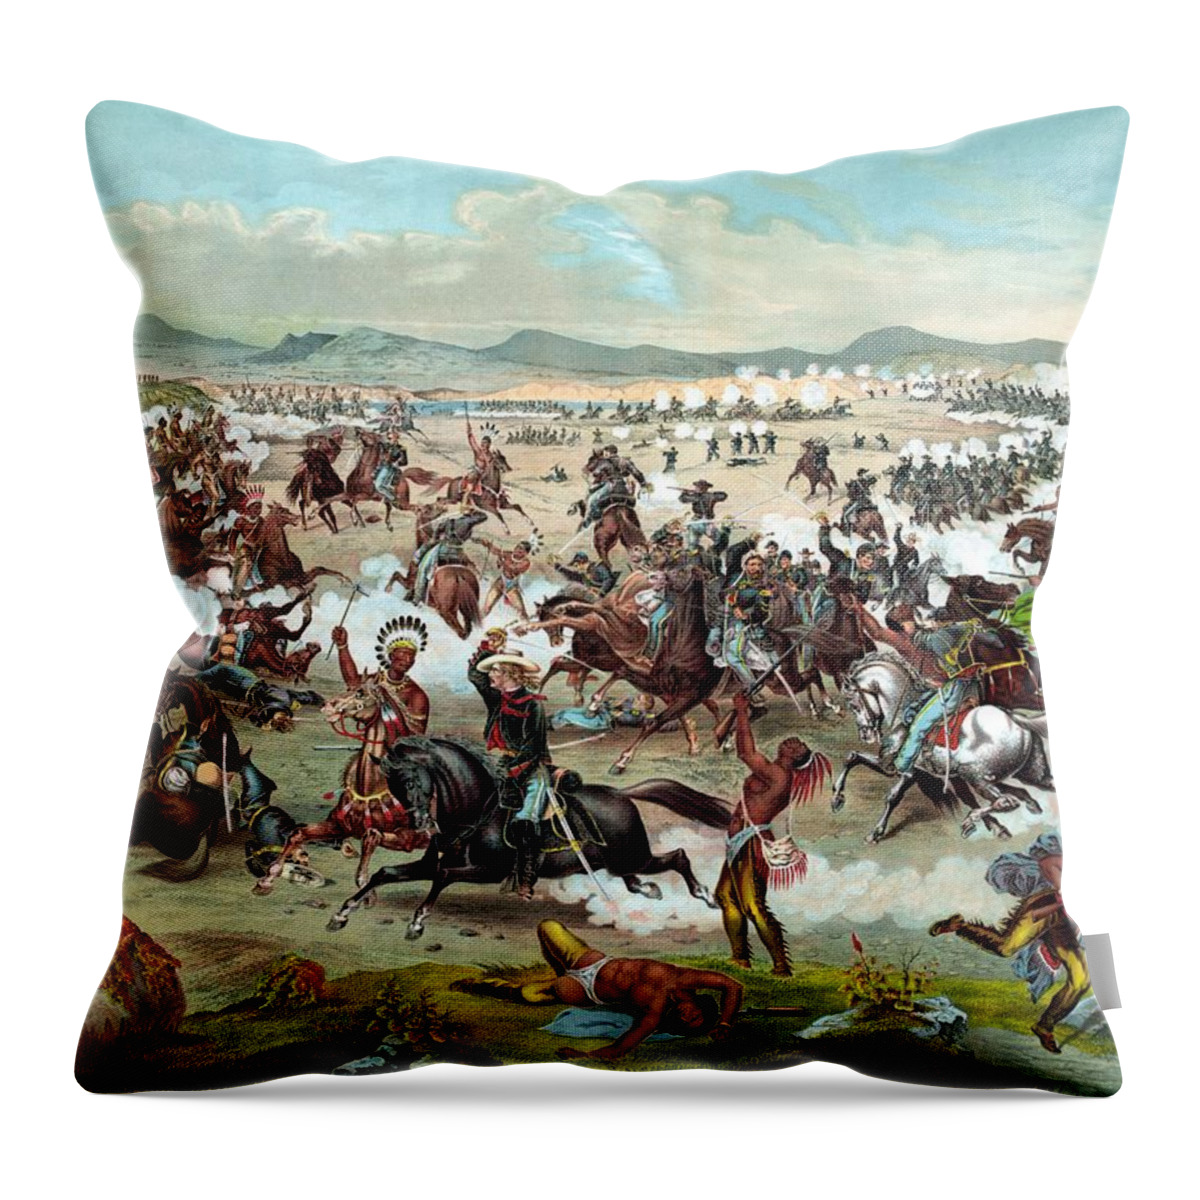 General Custer Throw Pillow featuring the painting Custer's Last Stand #1 by War Is Hell Store